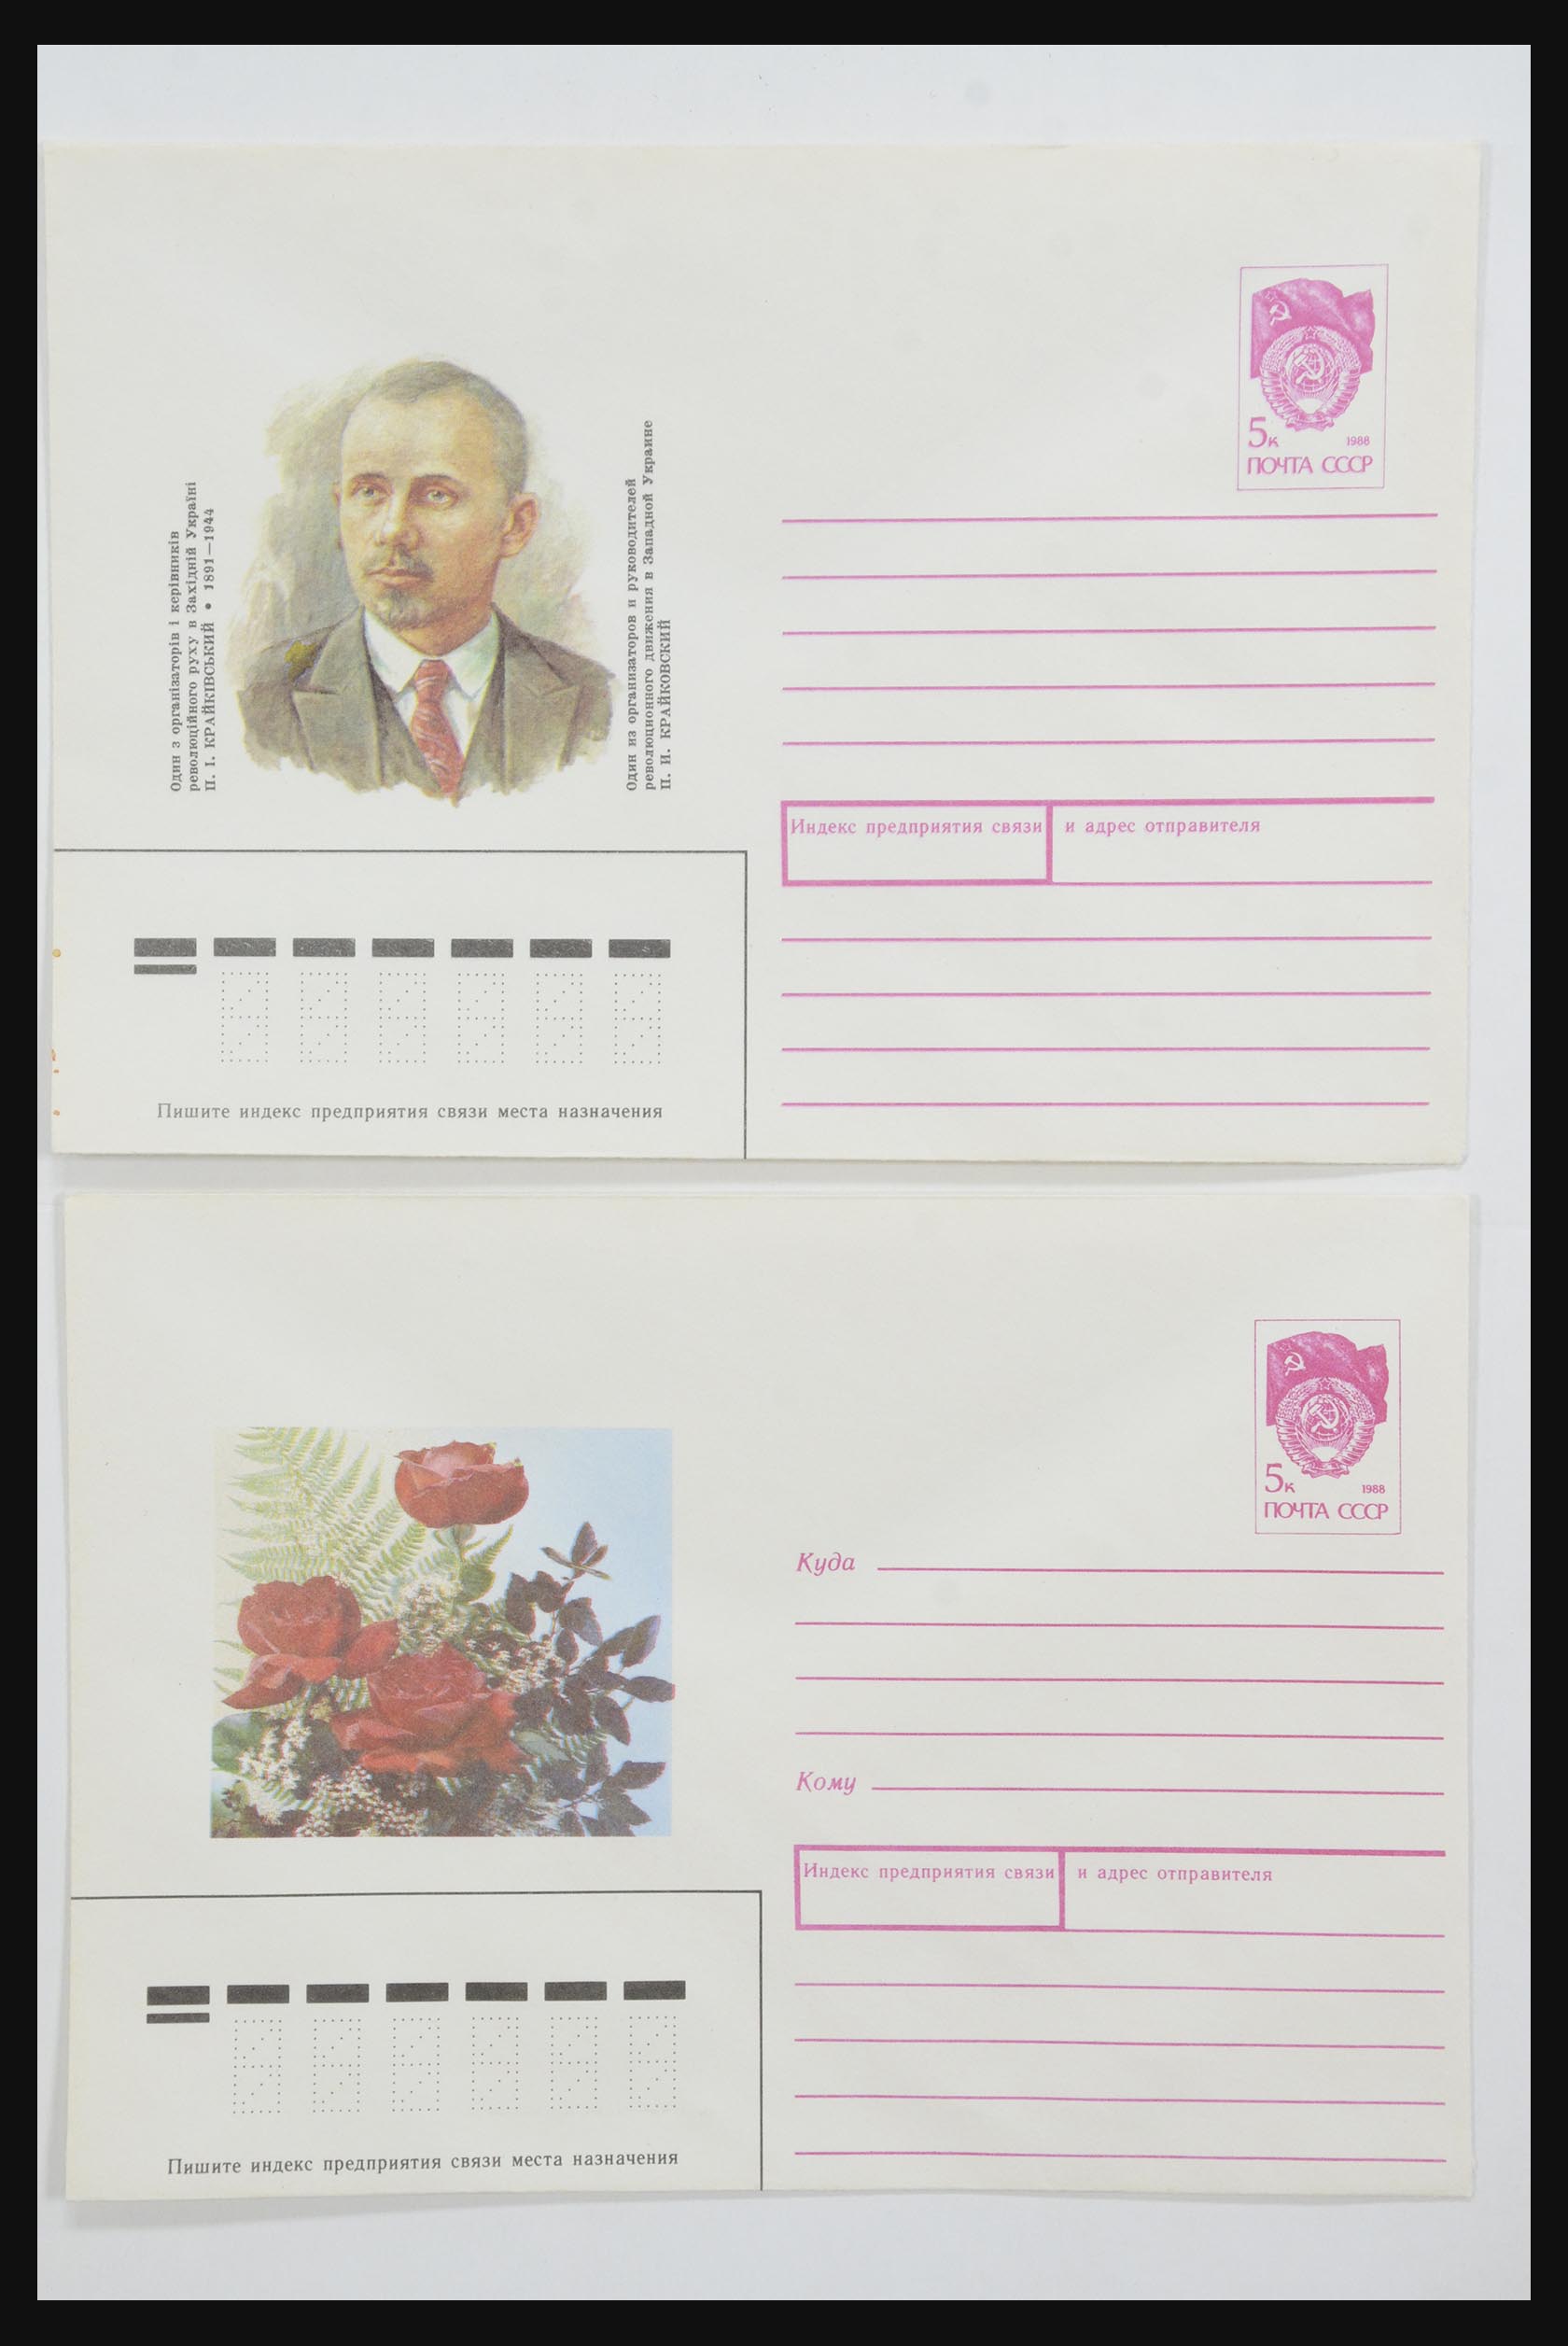 31928 0093 - 31928 Eastern Europe covers 1960's-1990's.